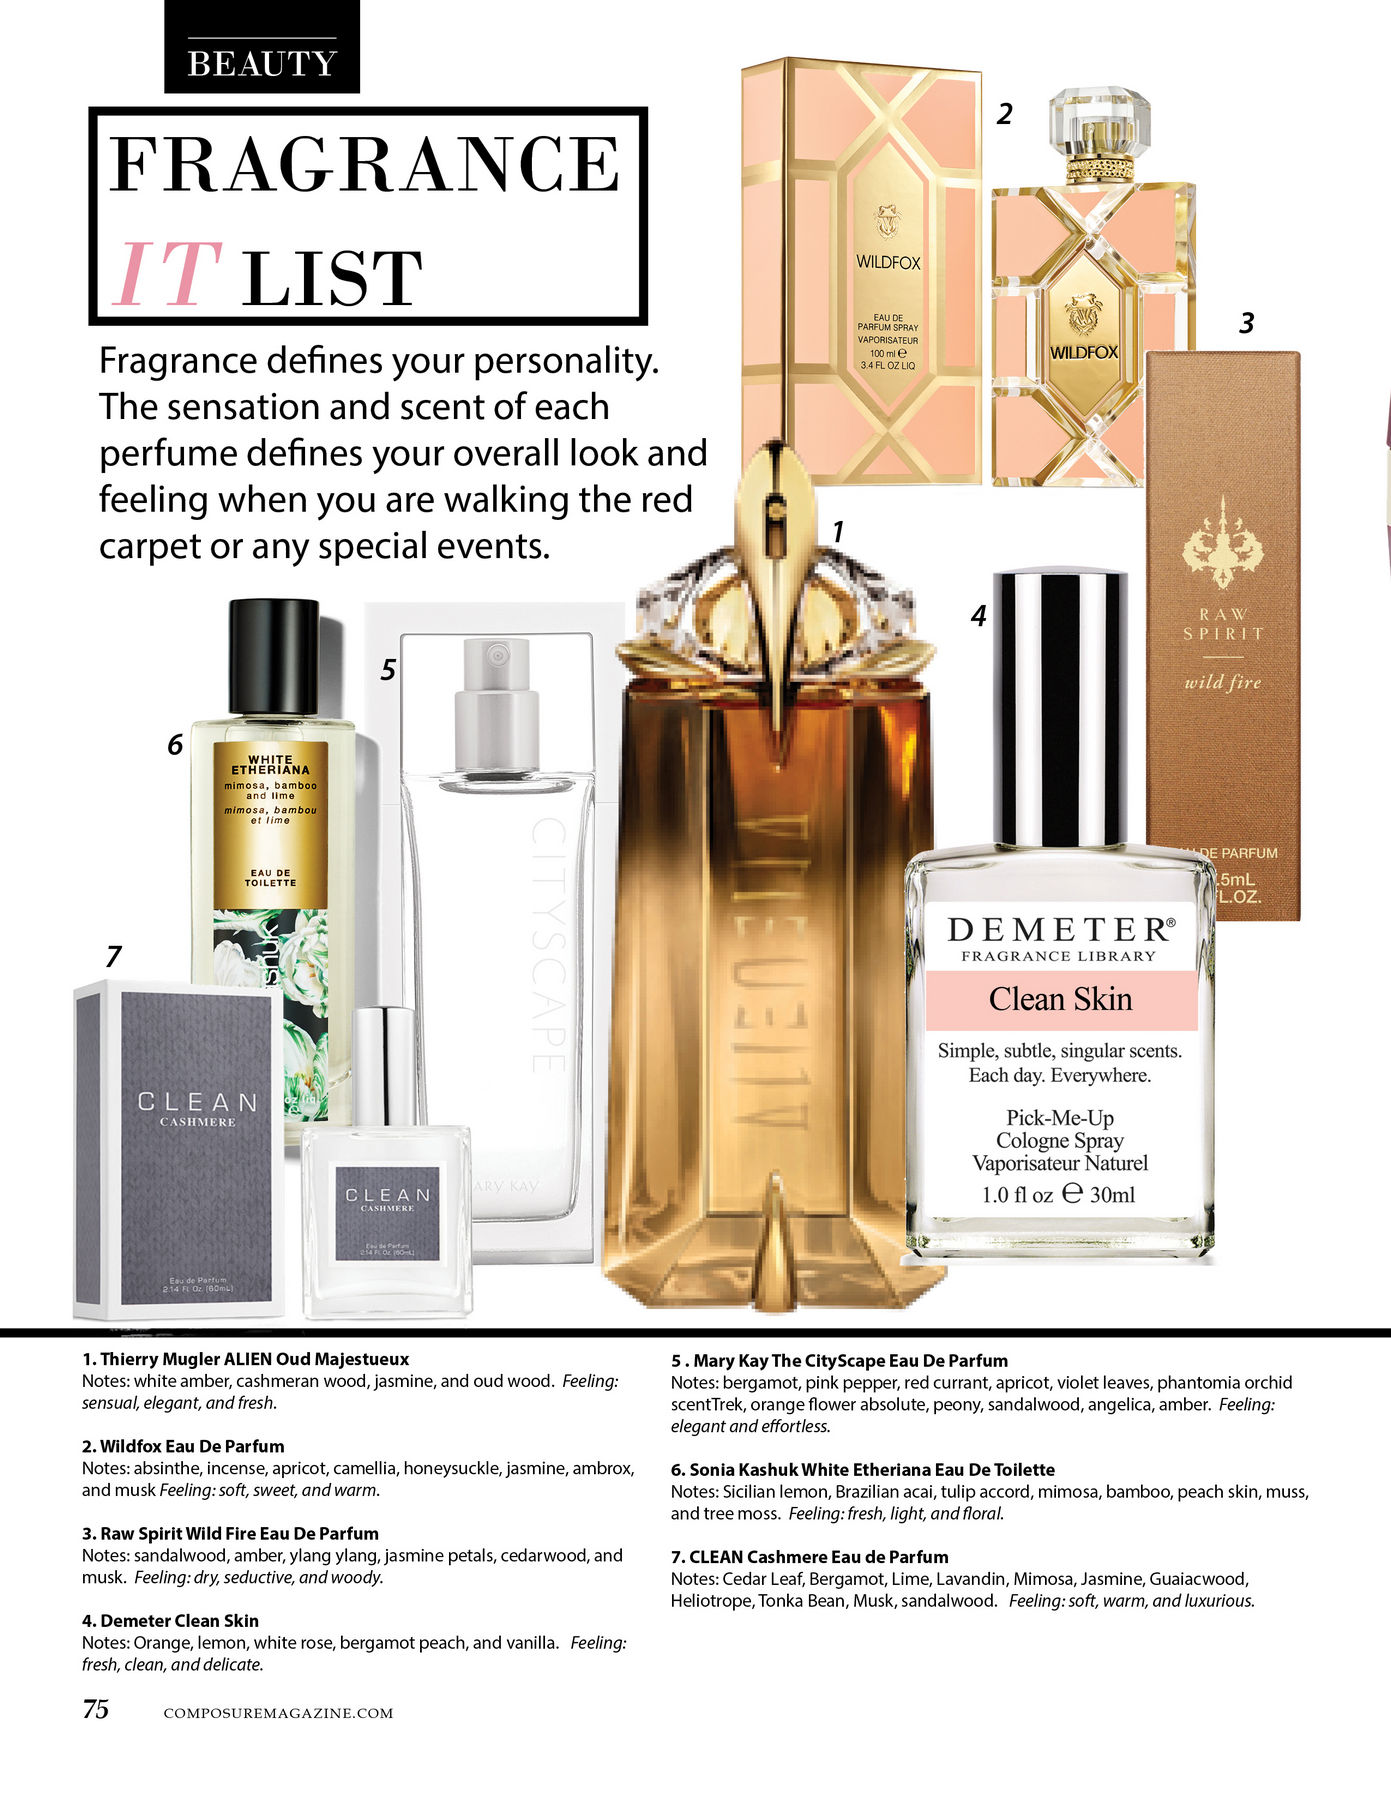 FRAGRANCE PRODUCT REVIEW BY COMPOSURE MAGAZINE